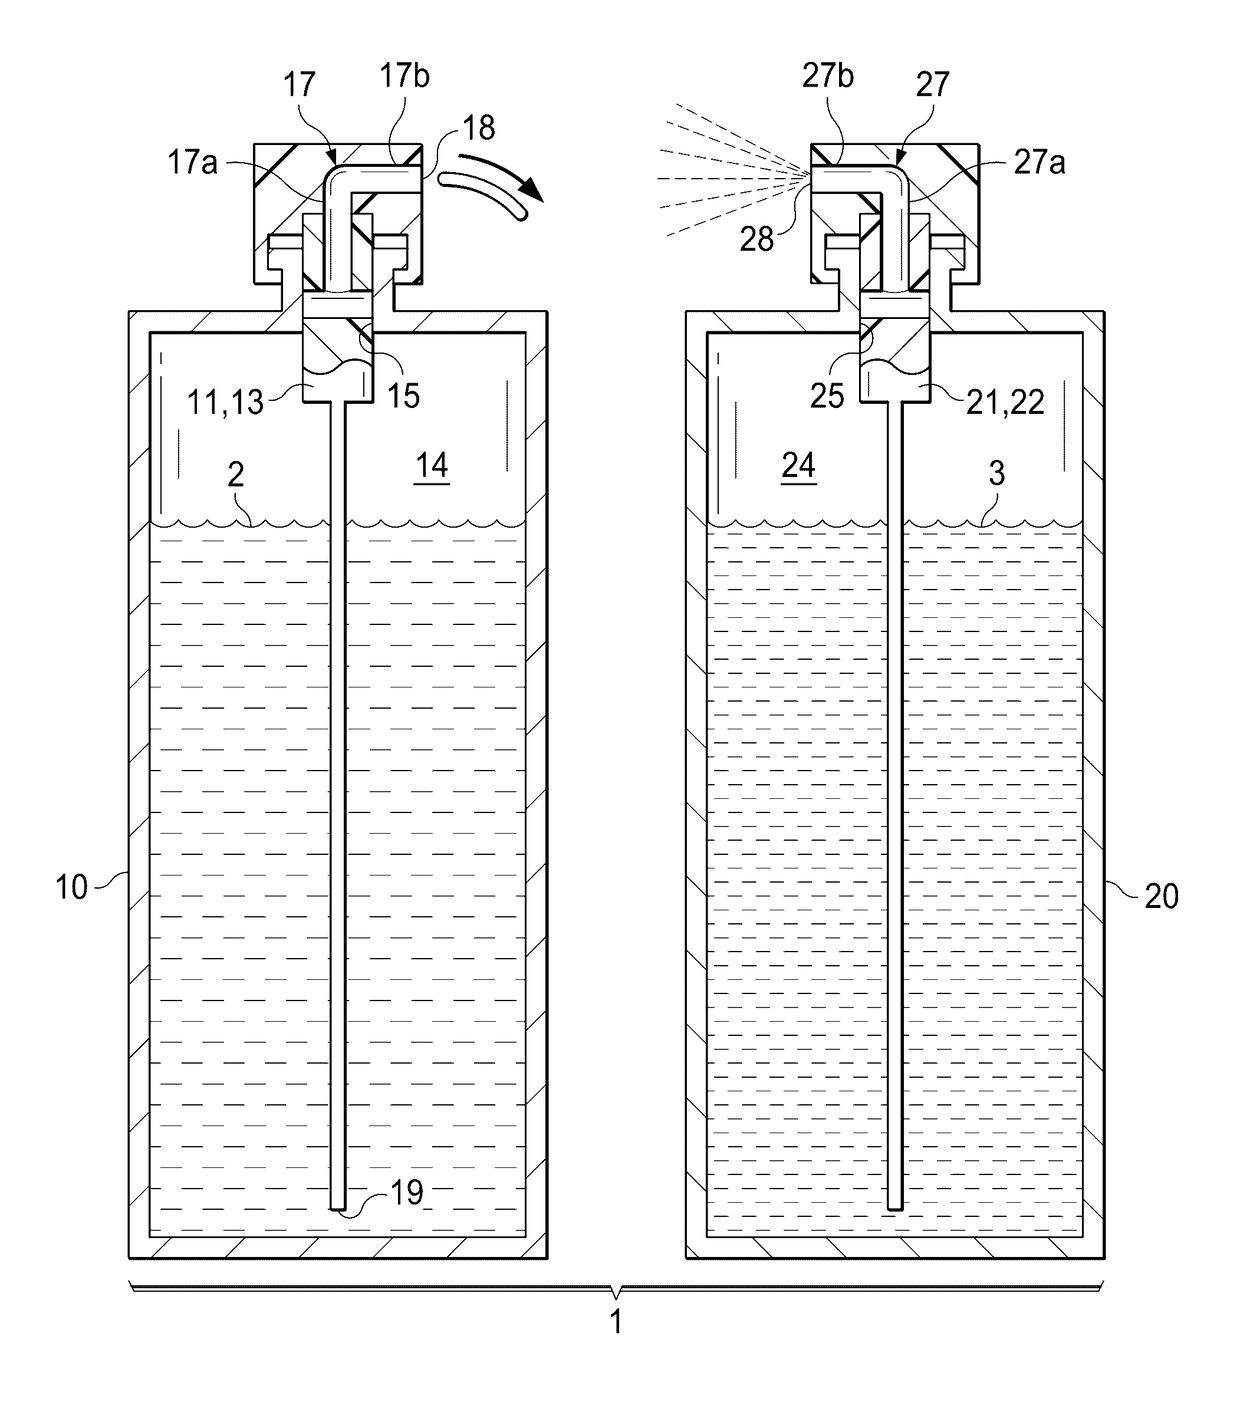 Portable multi-fragrance compositional dispensing system and methods of use